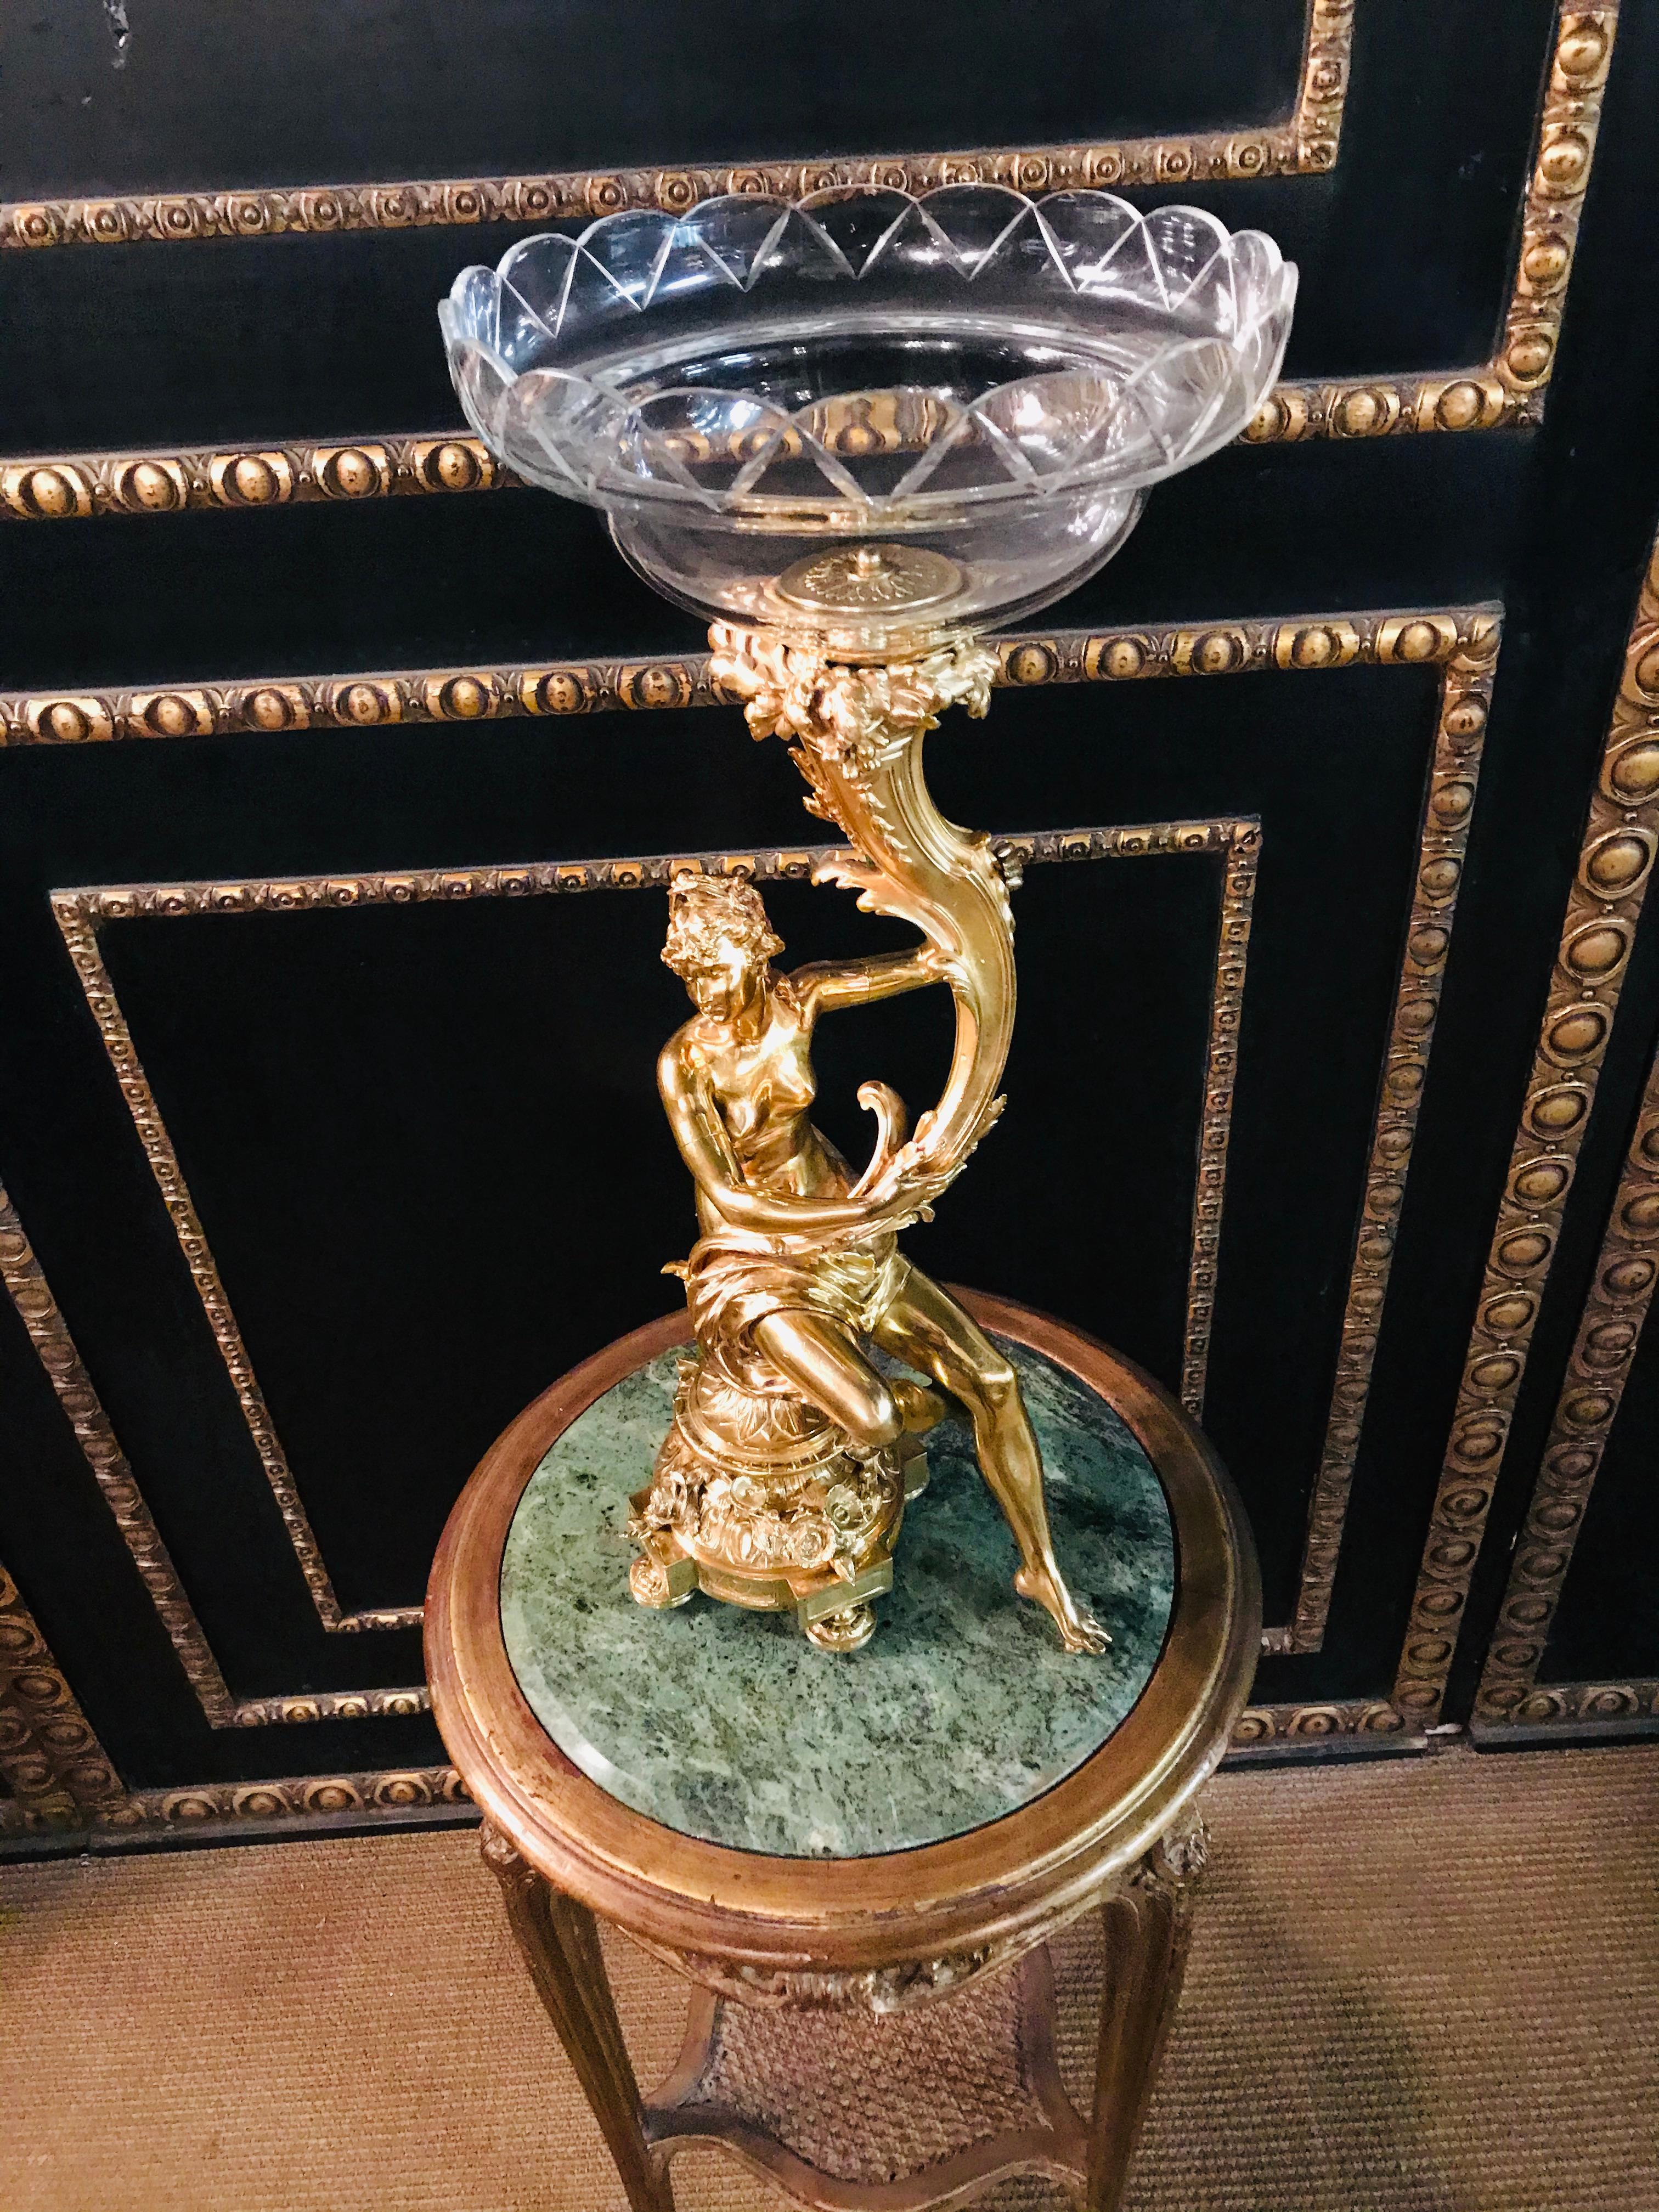 Very large figural centerpiece, 19th century polished brass. Profiled and ornamented pedestal with garlands. Sitting on it a naked beautiful woman, one foot on a small ball. Holding a cornucopia covered in foliage in his hands. Glass bowl attachment